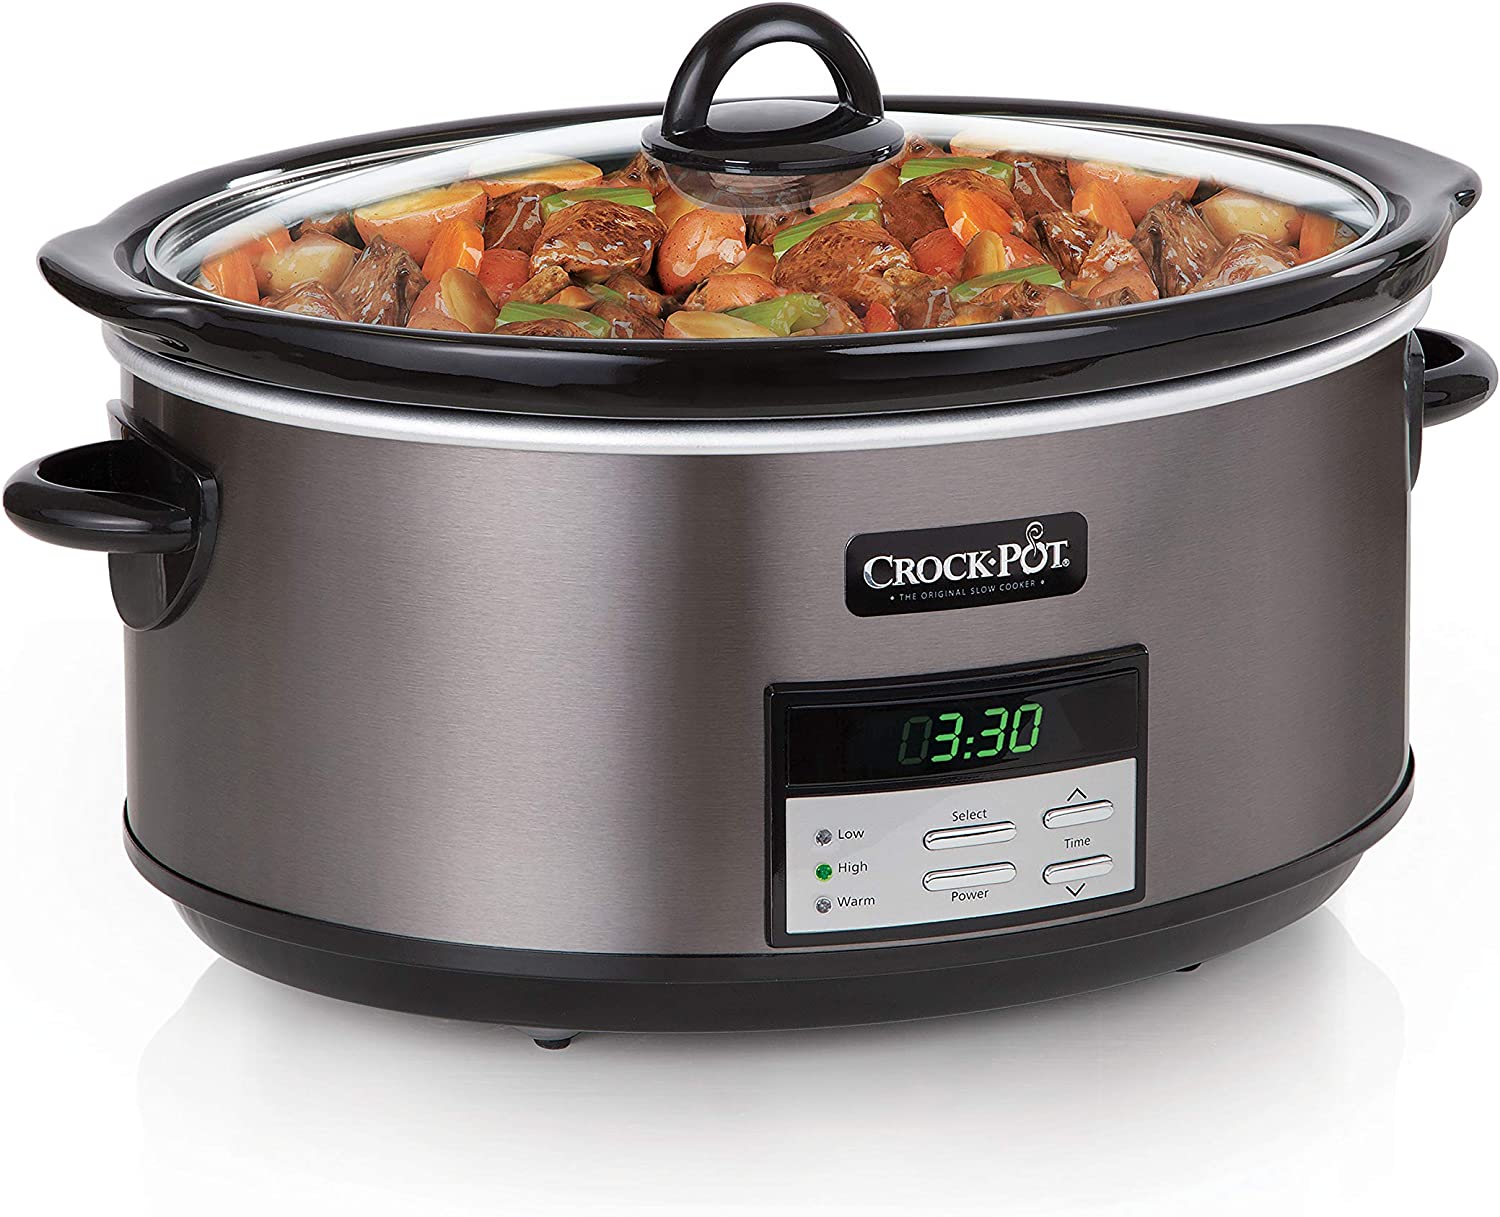 https://bigbigmart.com/wp-content/uploads/2023/03/Crock-Pot-8-Quart-Slow-Cooker-with-Auto-Warm-Setting-and-Cookbook-Black-Stainless-Steel1.jpg